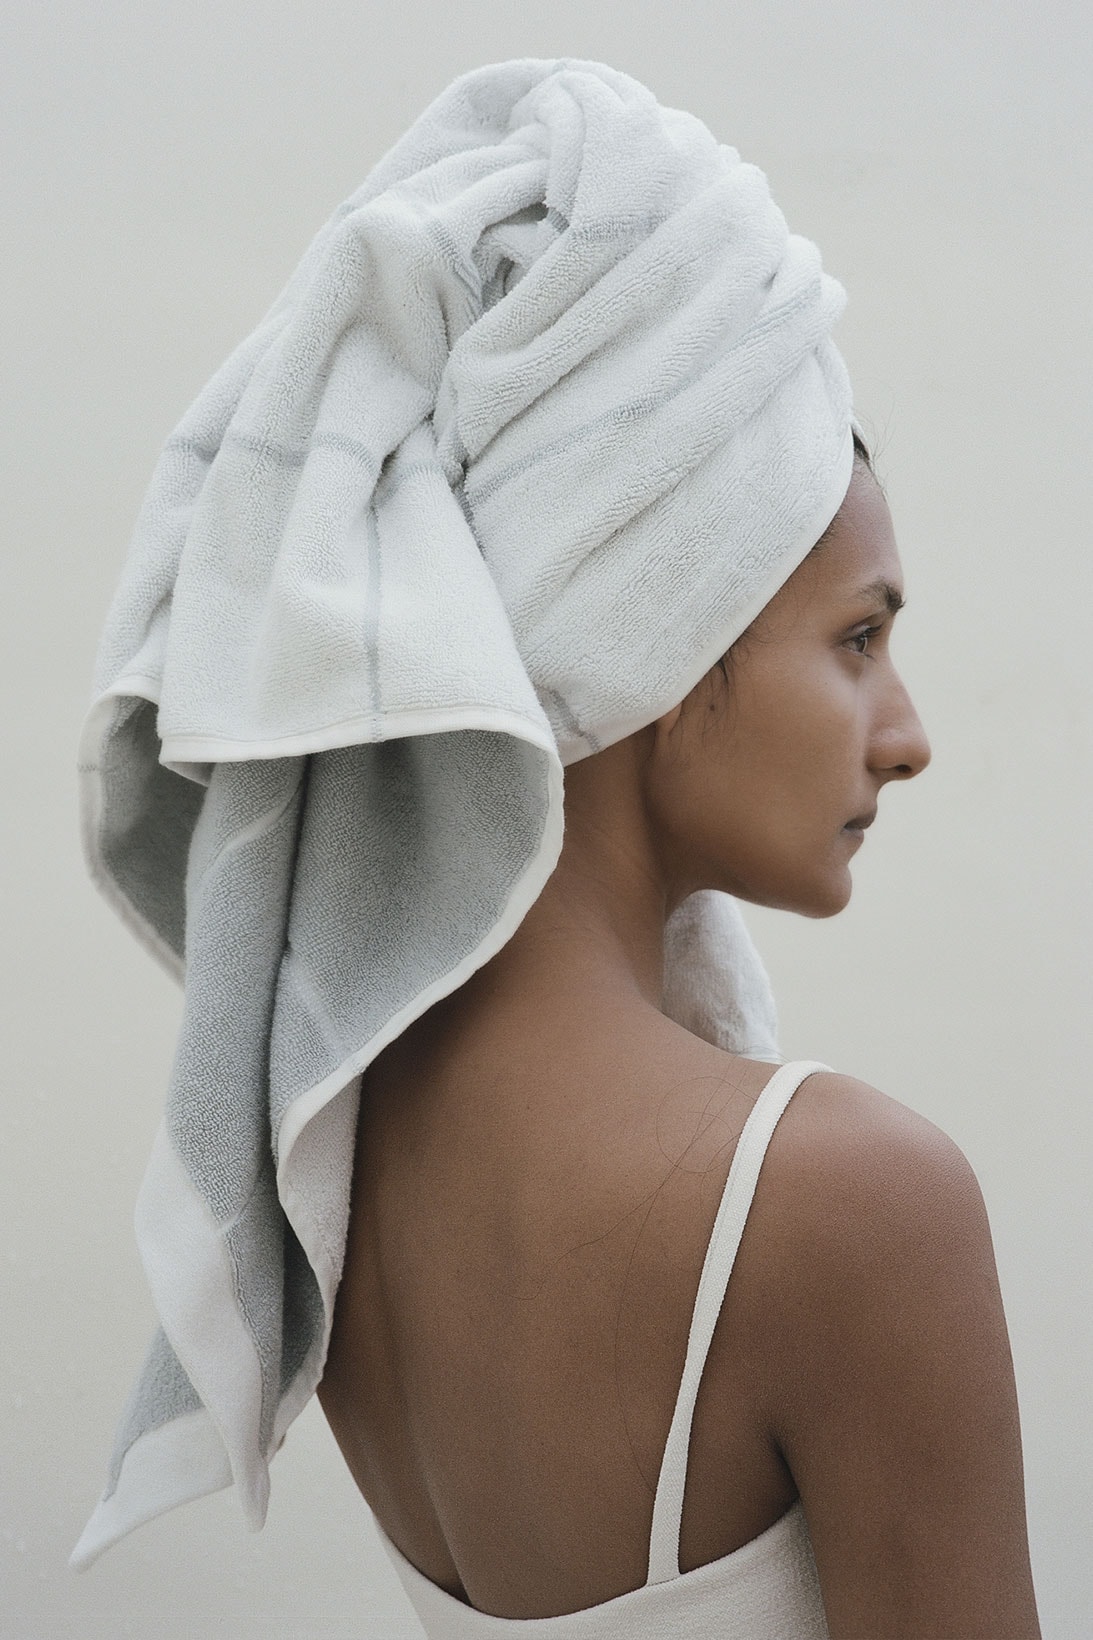 LESSE Skincare BAINA Luxury Towel Collaboration Limited Edition RElease Info